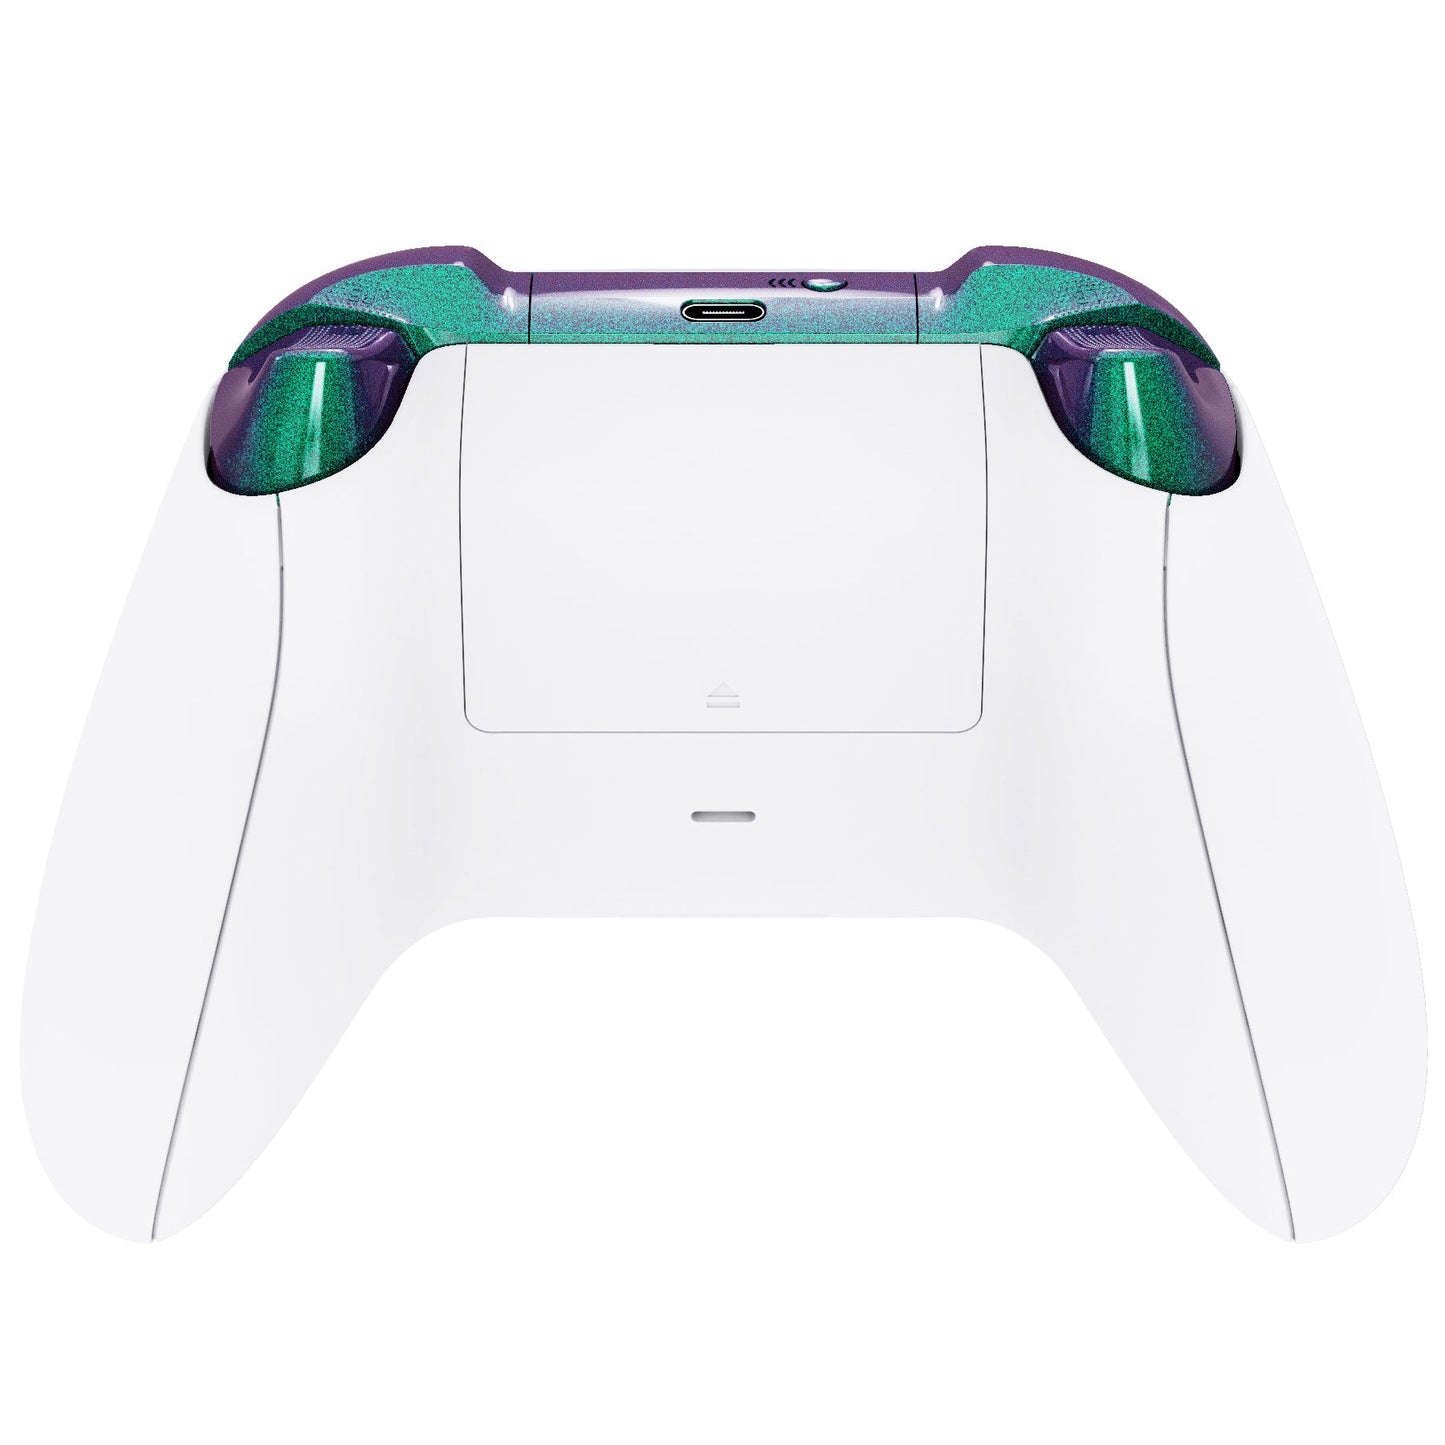 eXtremeRate Retail No Letter Imprint Custom Full Set Buttons for Xbox Series X/S Controller, Chameleon Green Purple Replacement Accessories Bumpers Triggers Dpad ABXY Buttons for Xbox Series X/S, Xbox Core Controller - JX3502